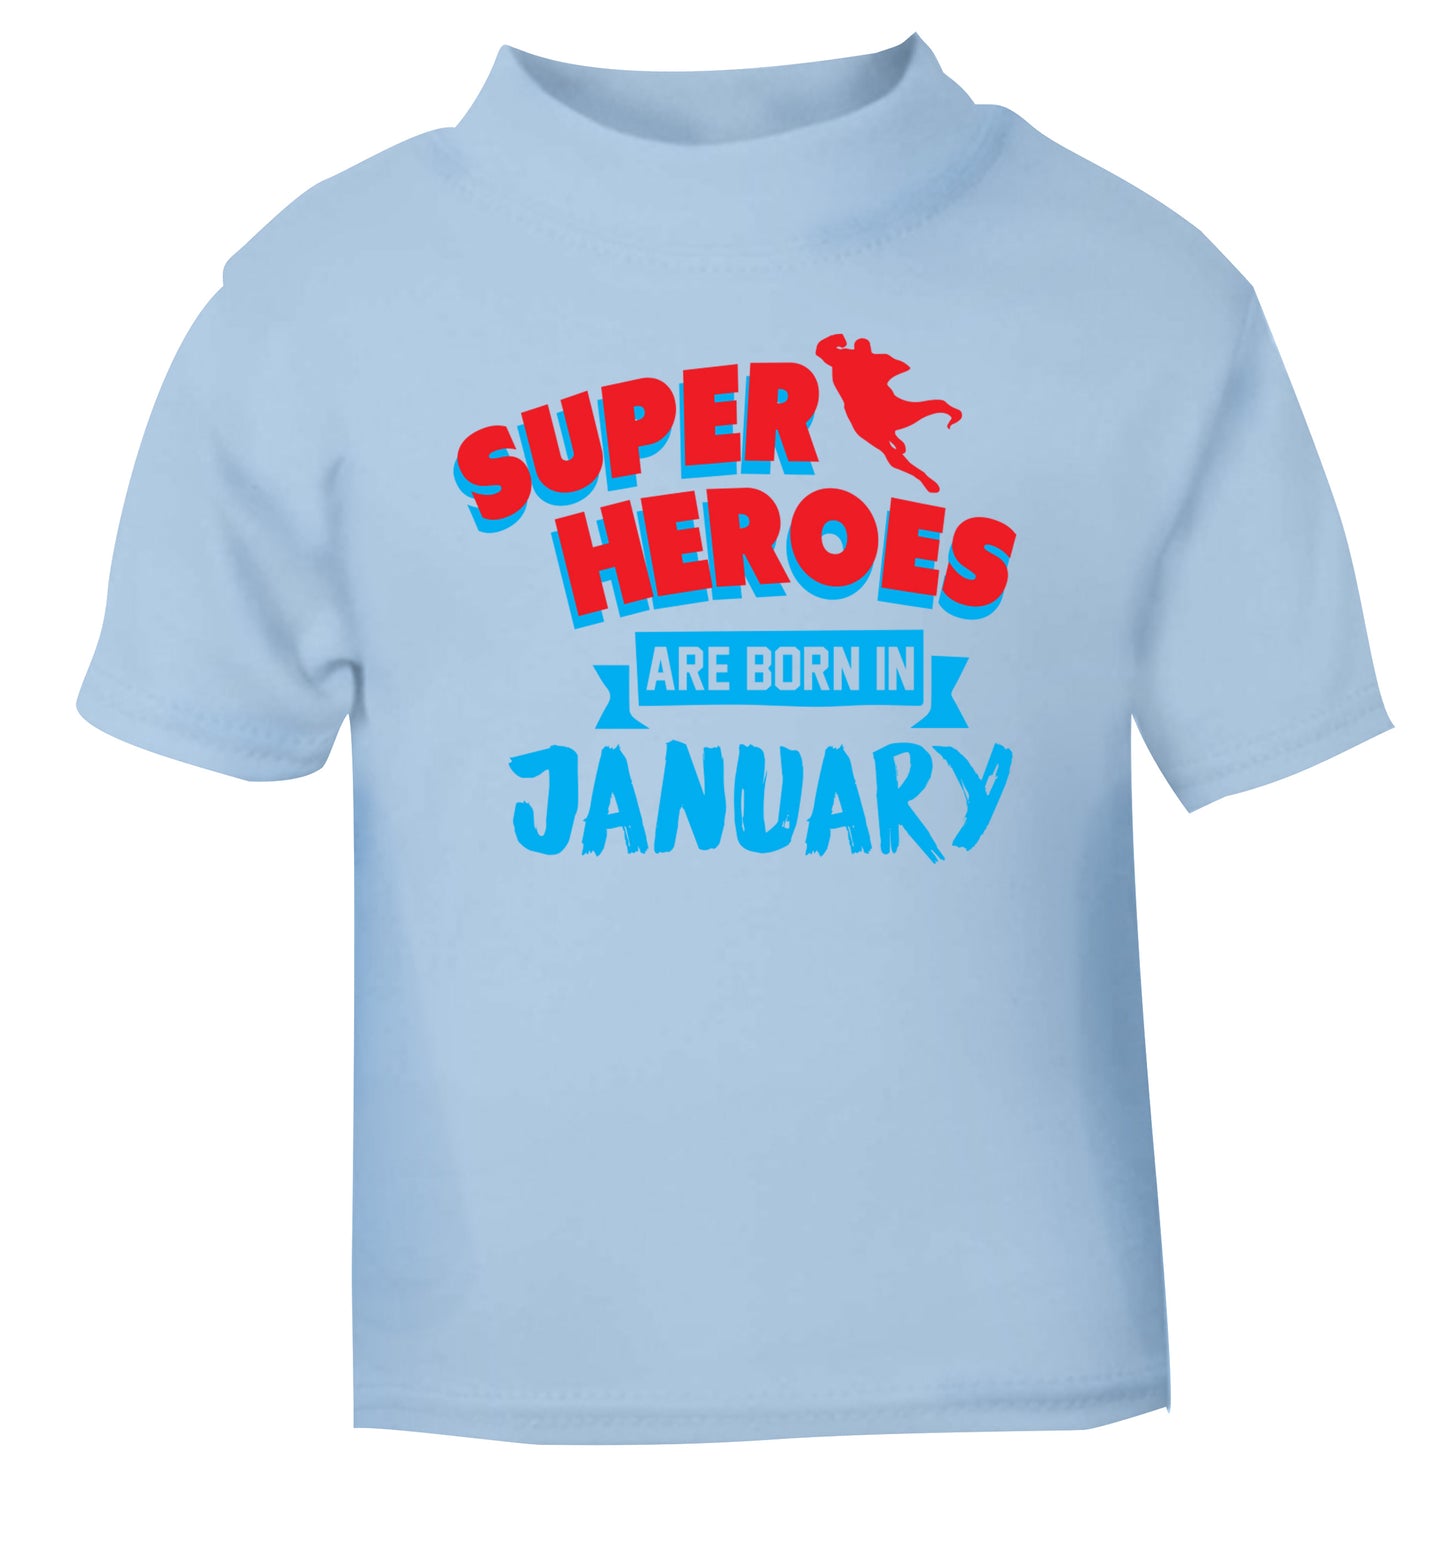 Superheros are born in January light blue Baby Toddler Tshirt 2 Years